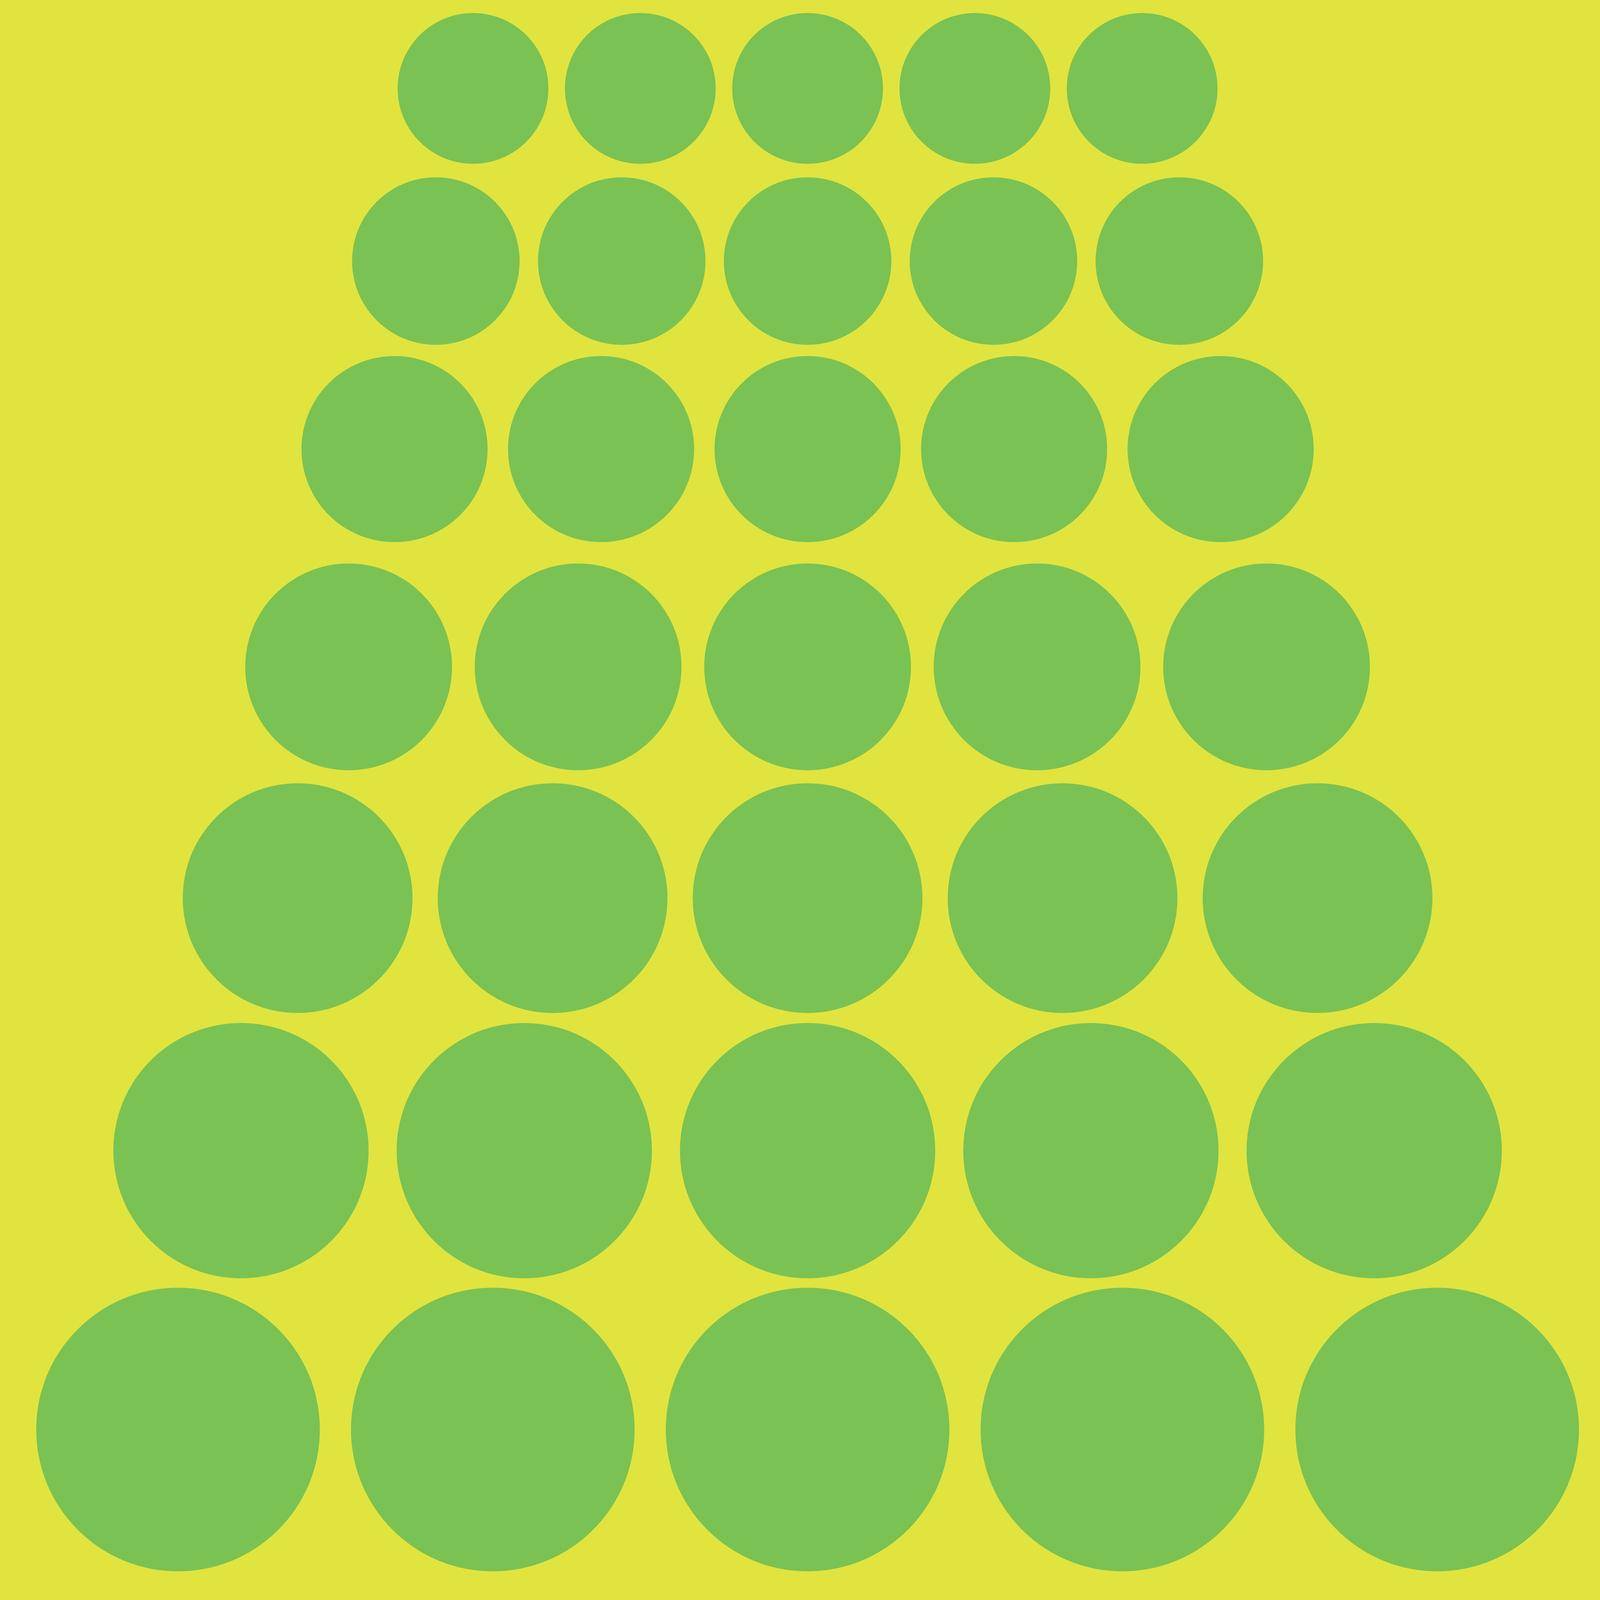 Pattern with green circles and a yellow background by Bwise